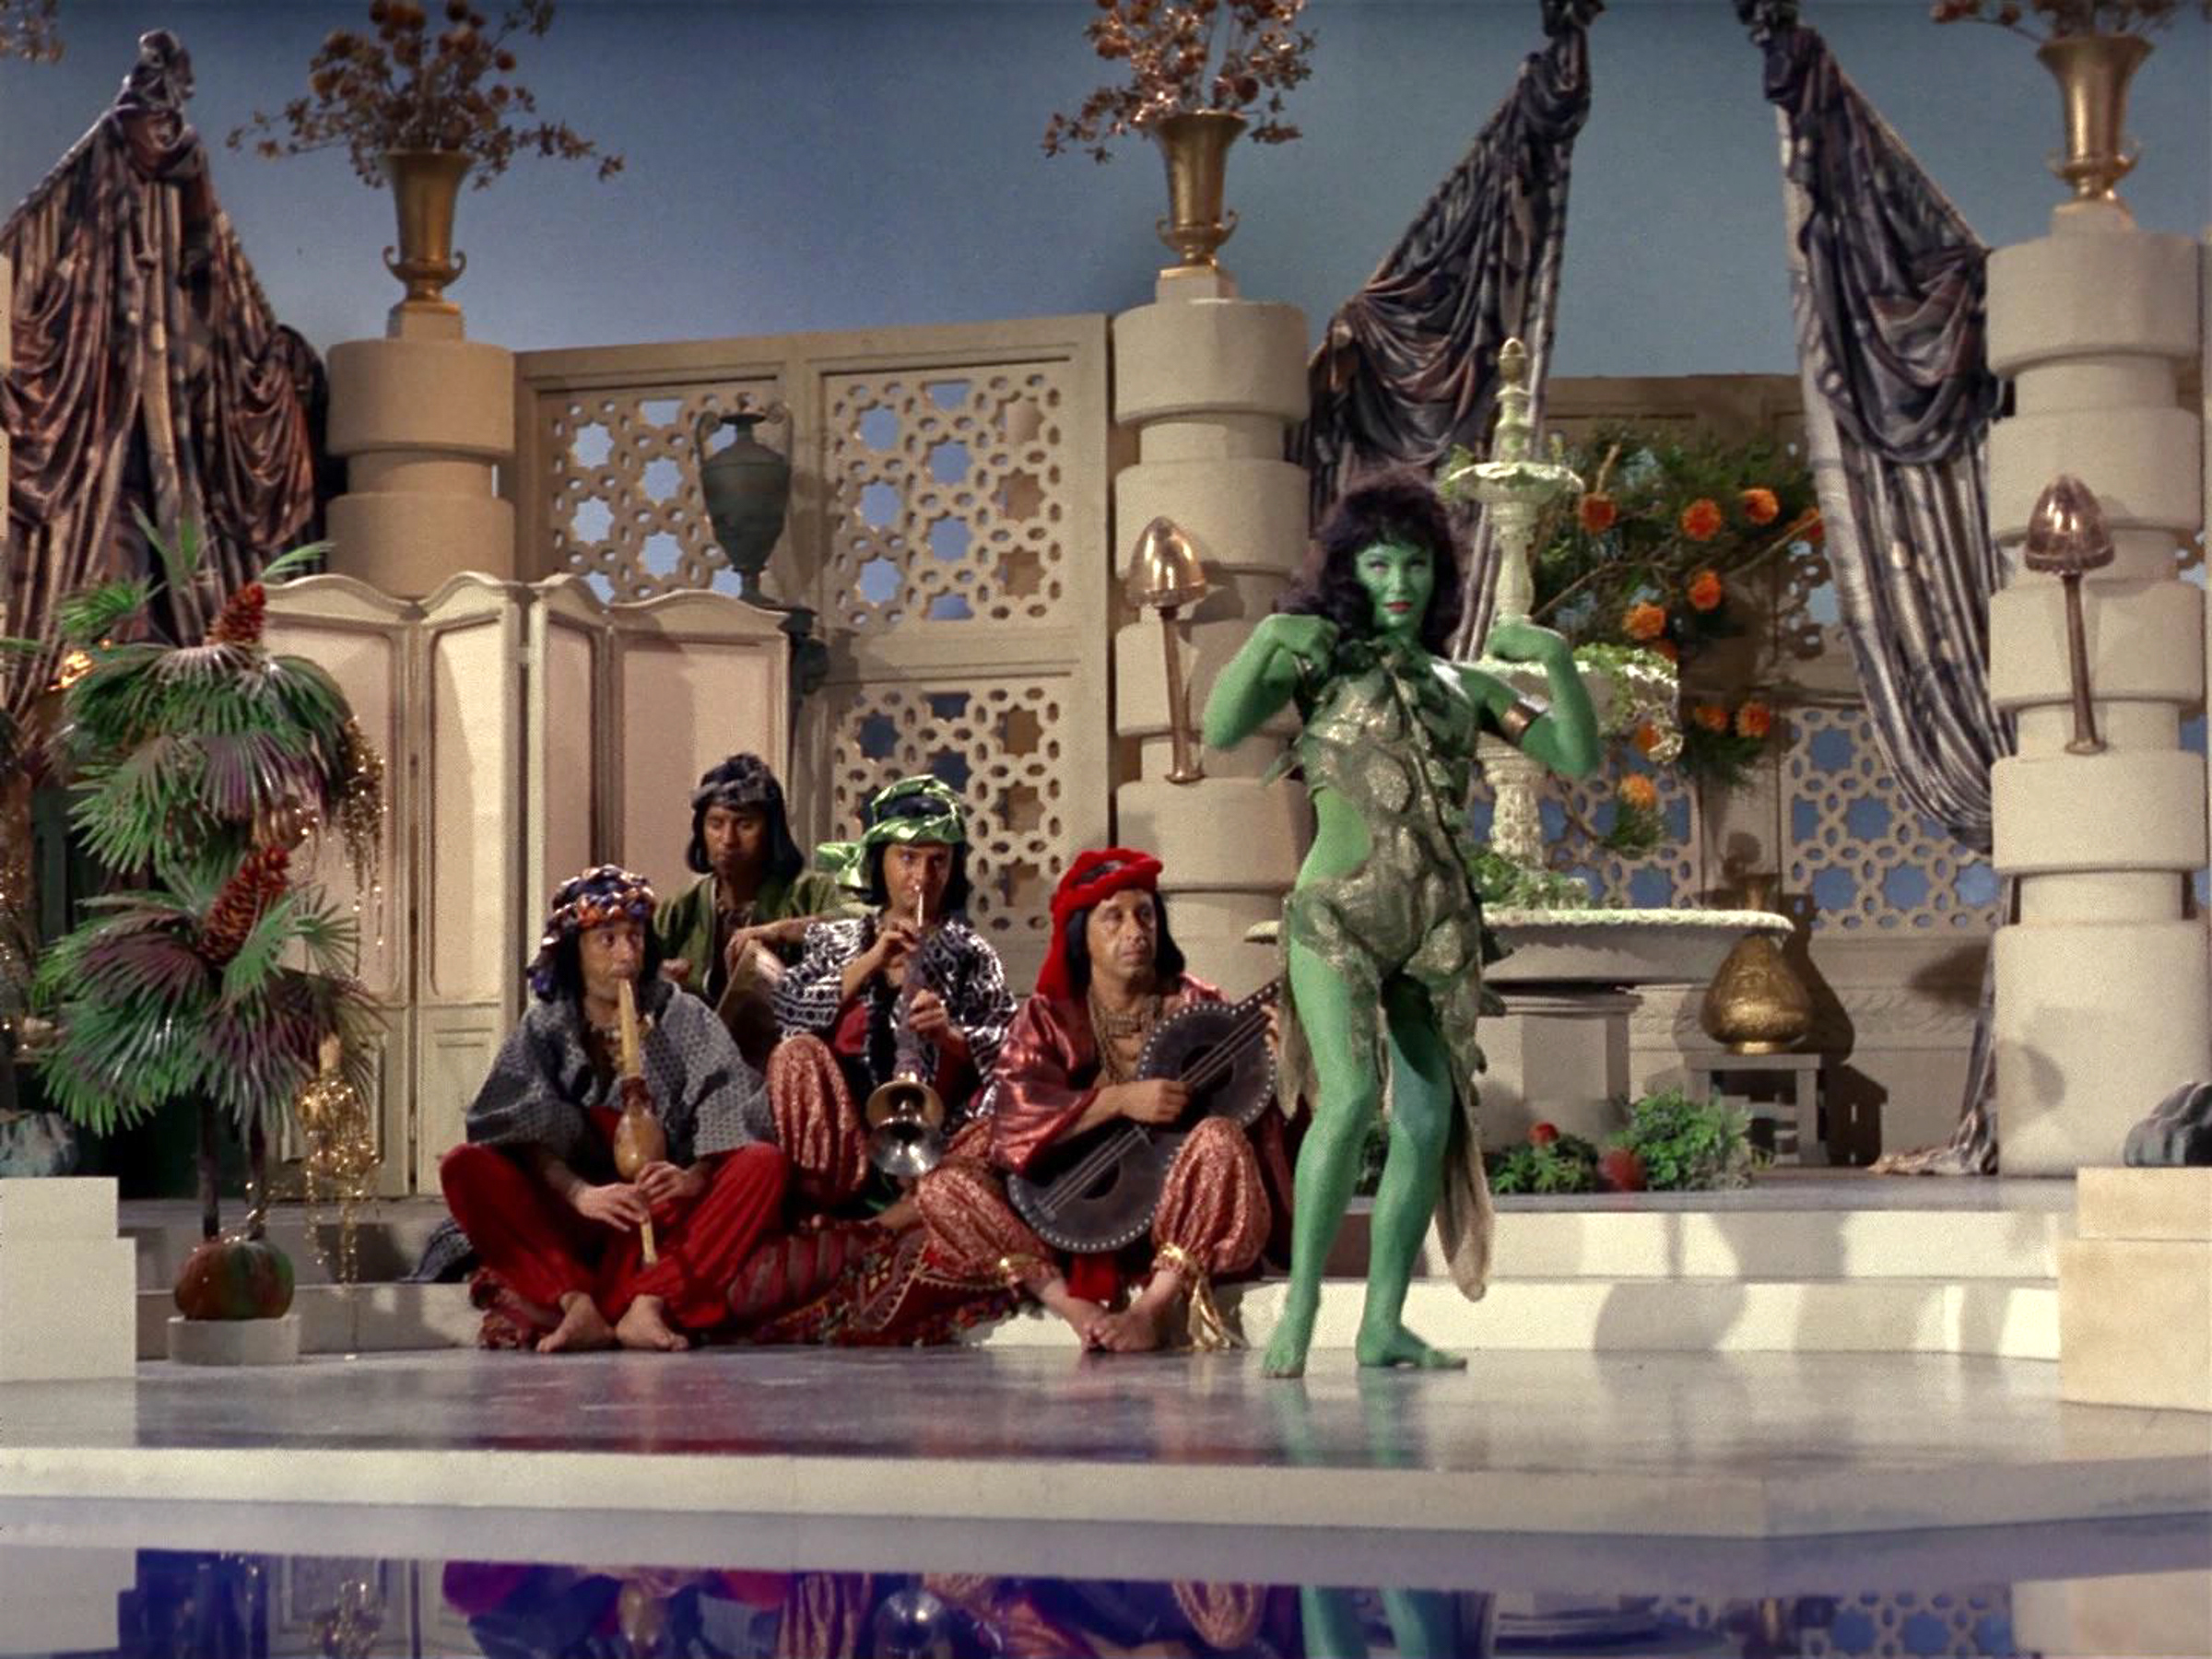 Susan Oliver as Vina appearing as an Orion slave girl.